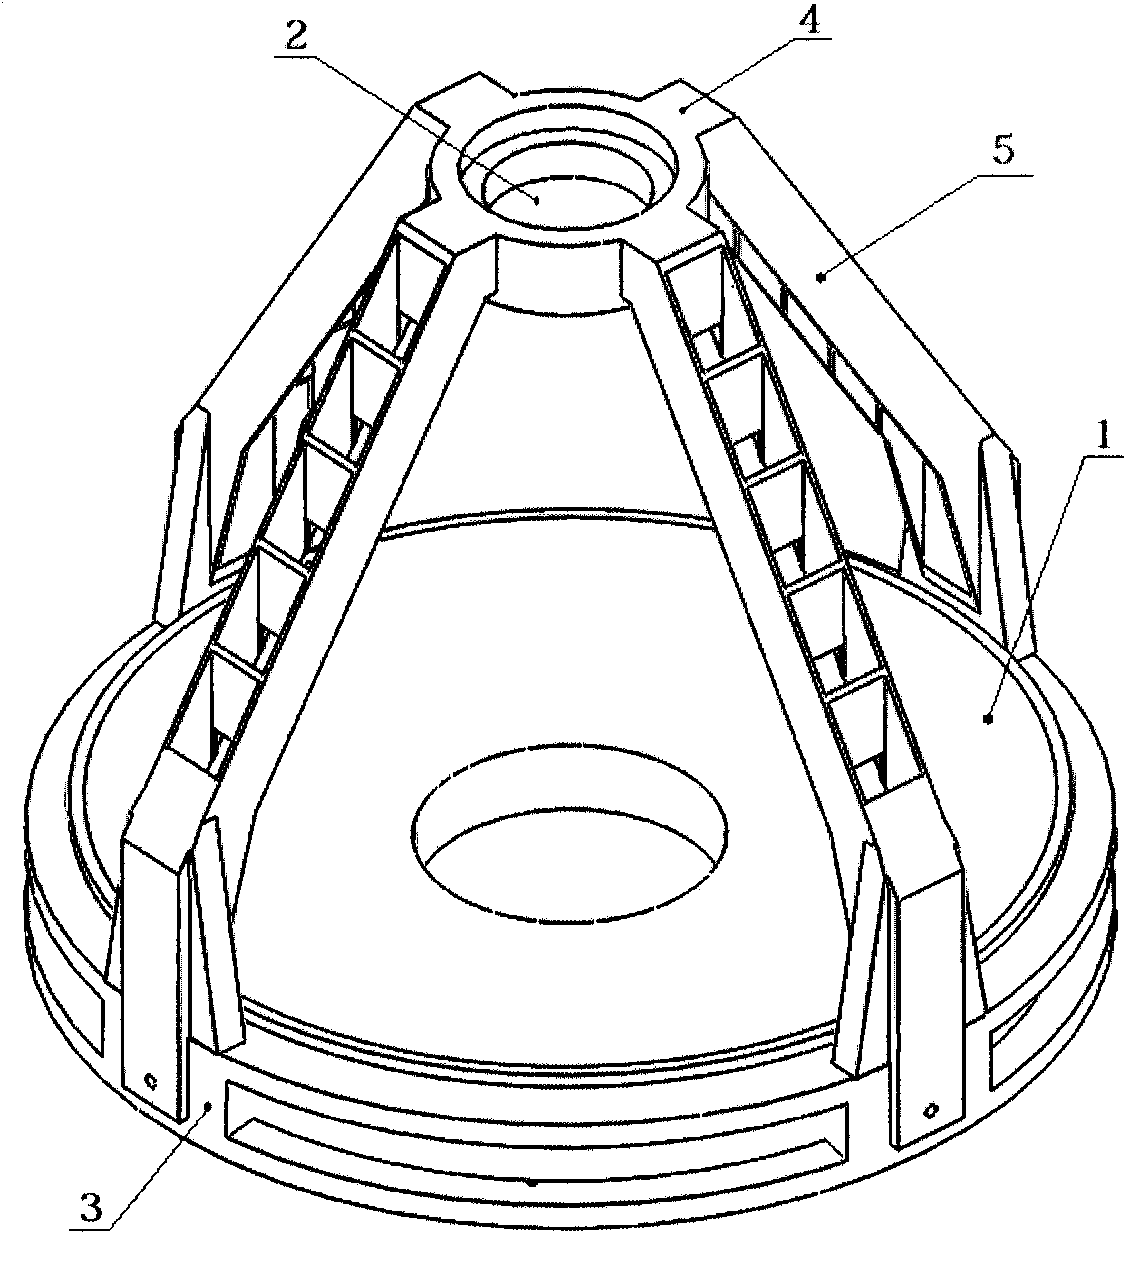 Secondary mirror support structure of space optical remote sensor